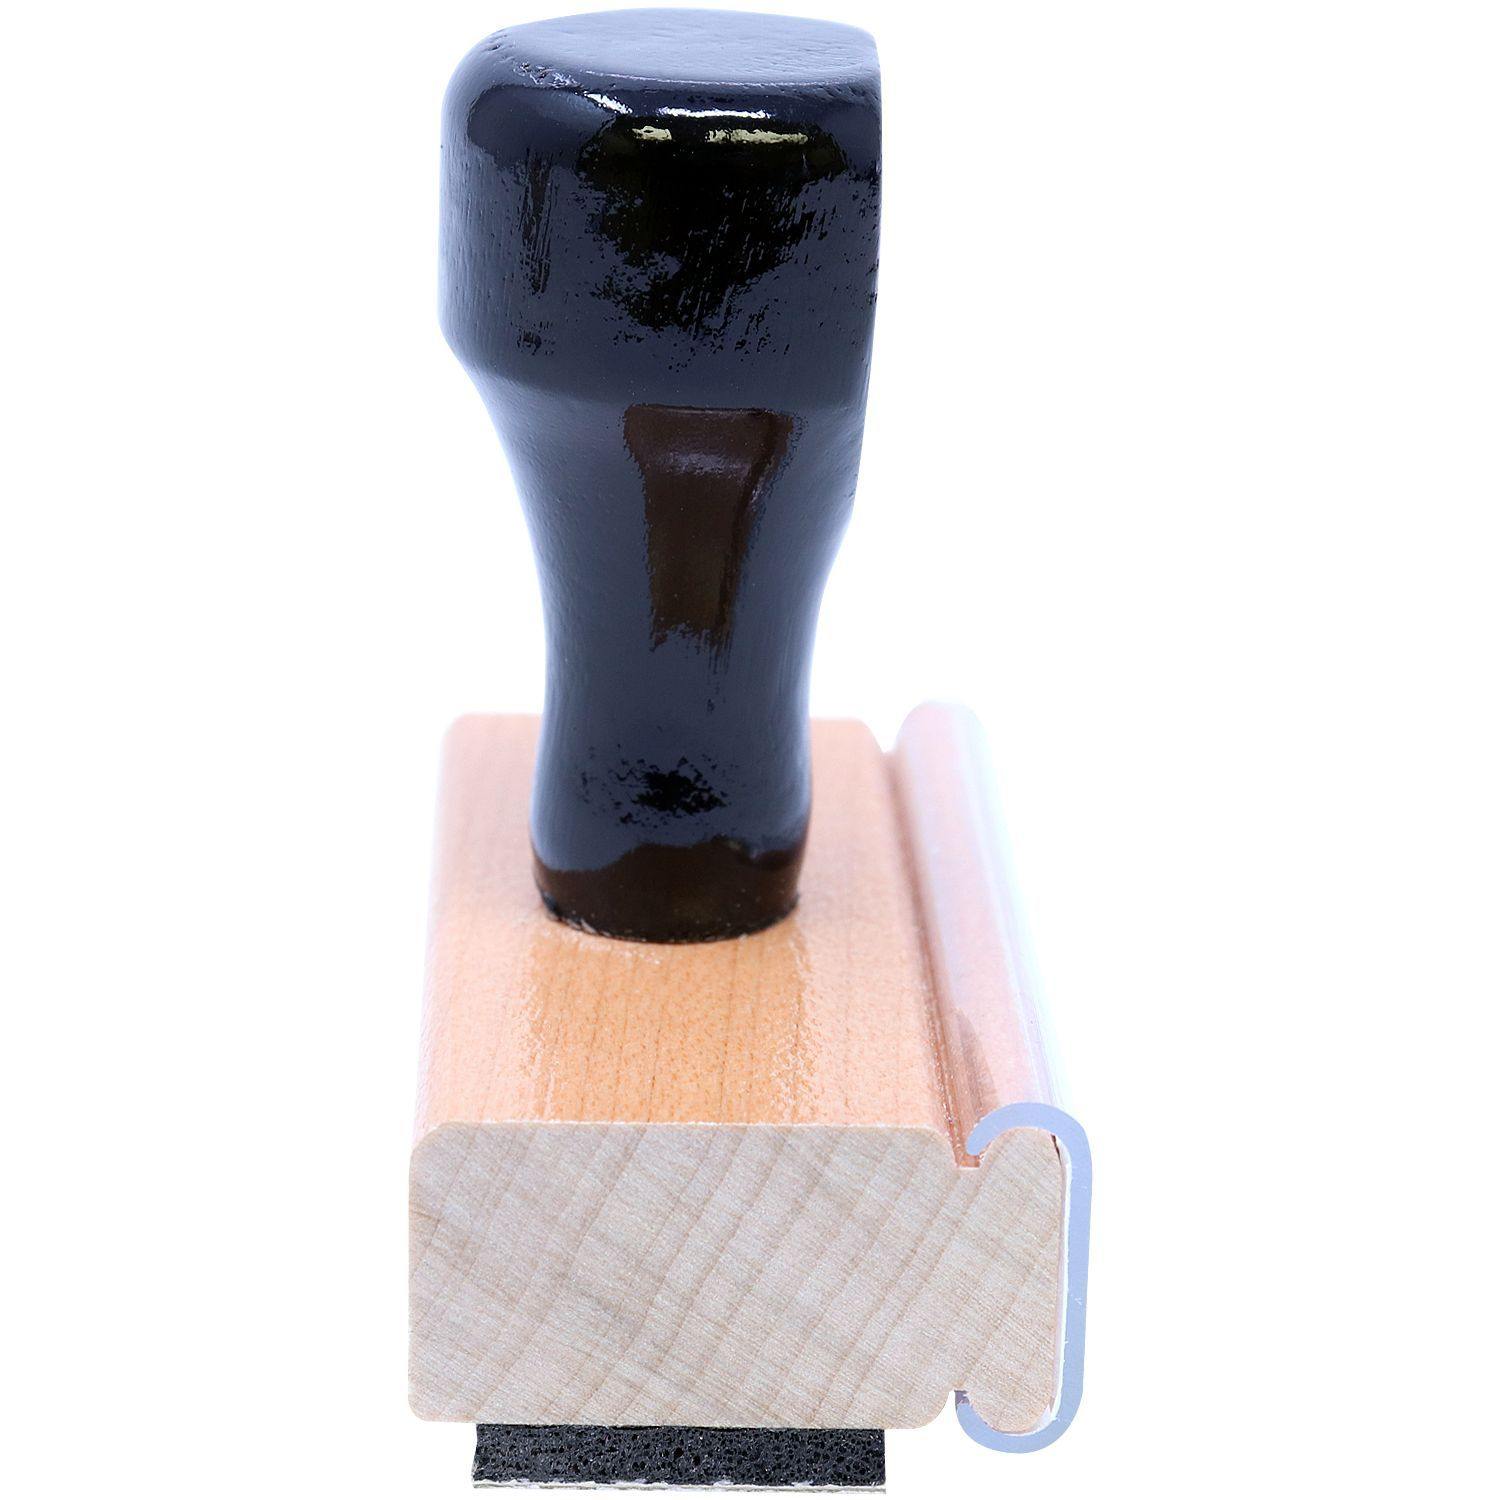 Lowercase Received with Date Box Rubber Stamp - Engineer Seal Stamps - Brand_Acorn, Impression Size_Small, Stamp Type_Regular Stamp, Type of Use_Postal, Type of Use_Shipping & Receiving